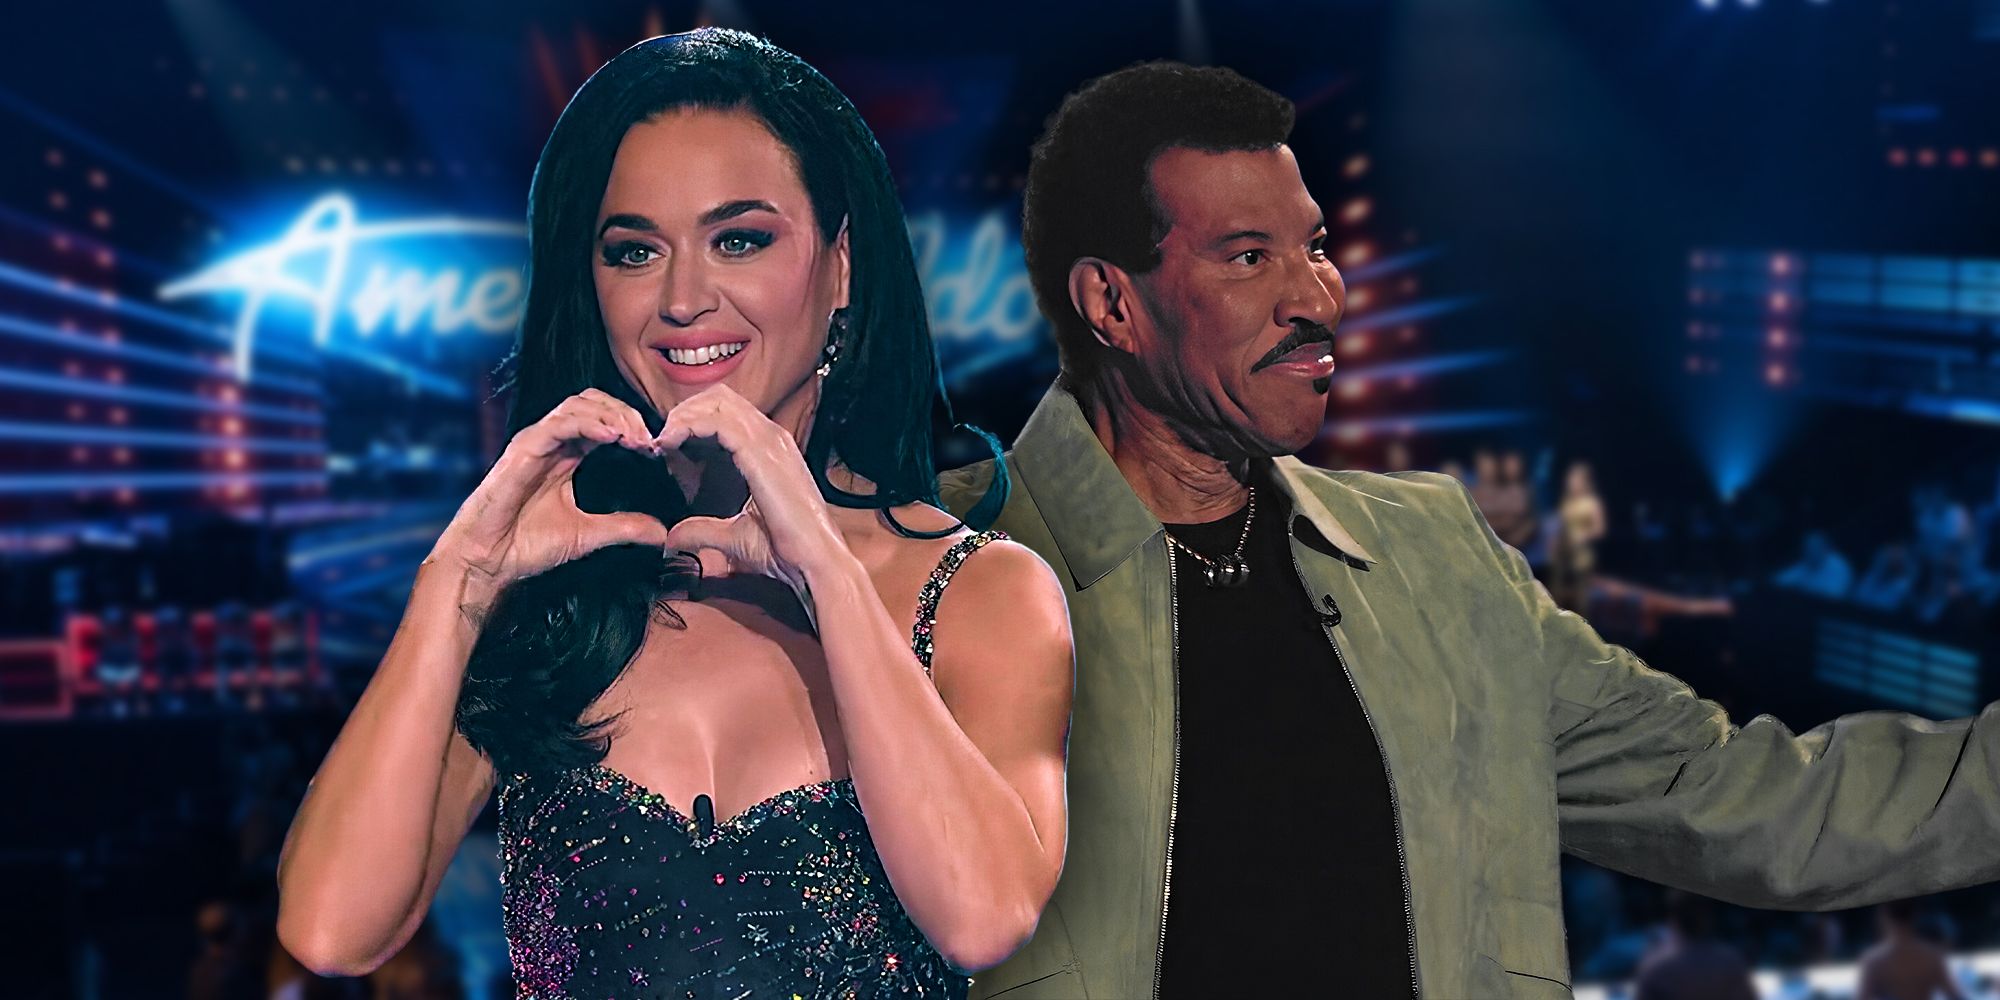 Katy Perry and Lionel Richie from American Idol